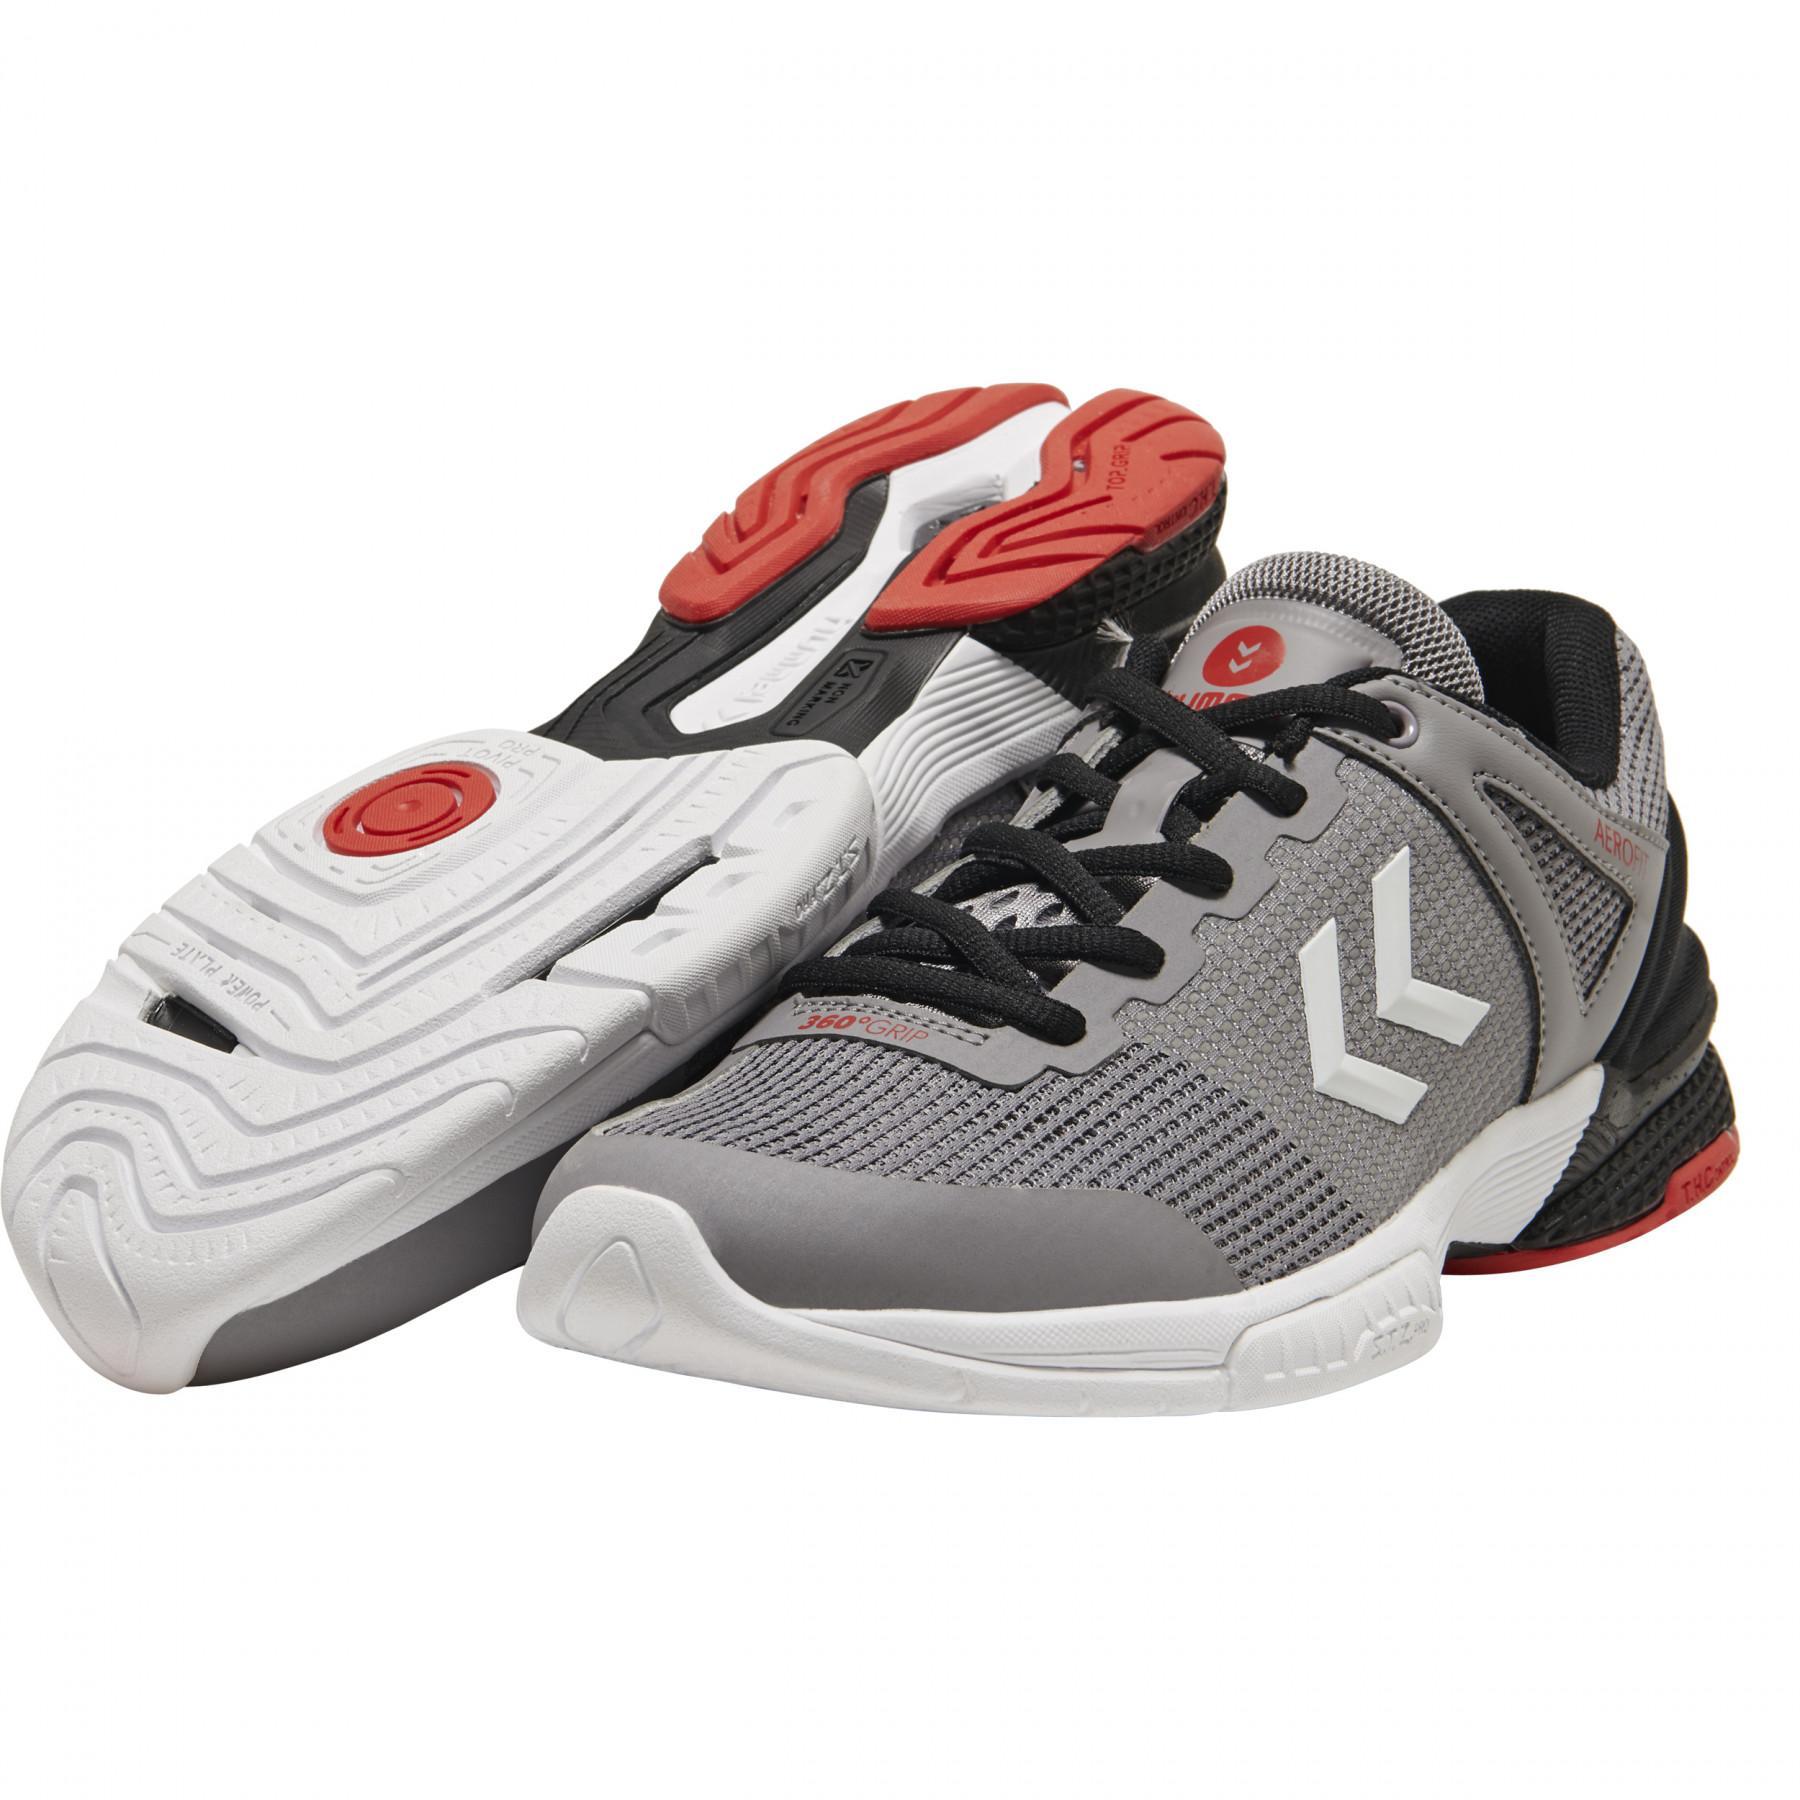 Chaussures Hummel Aero HB180 Rely 3.0